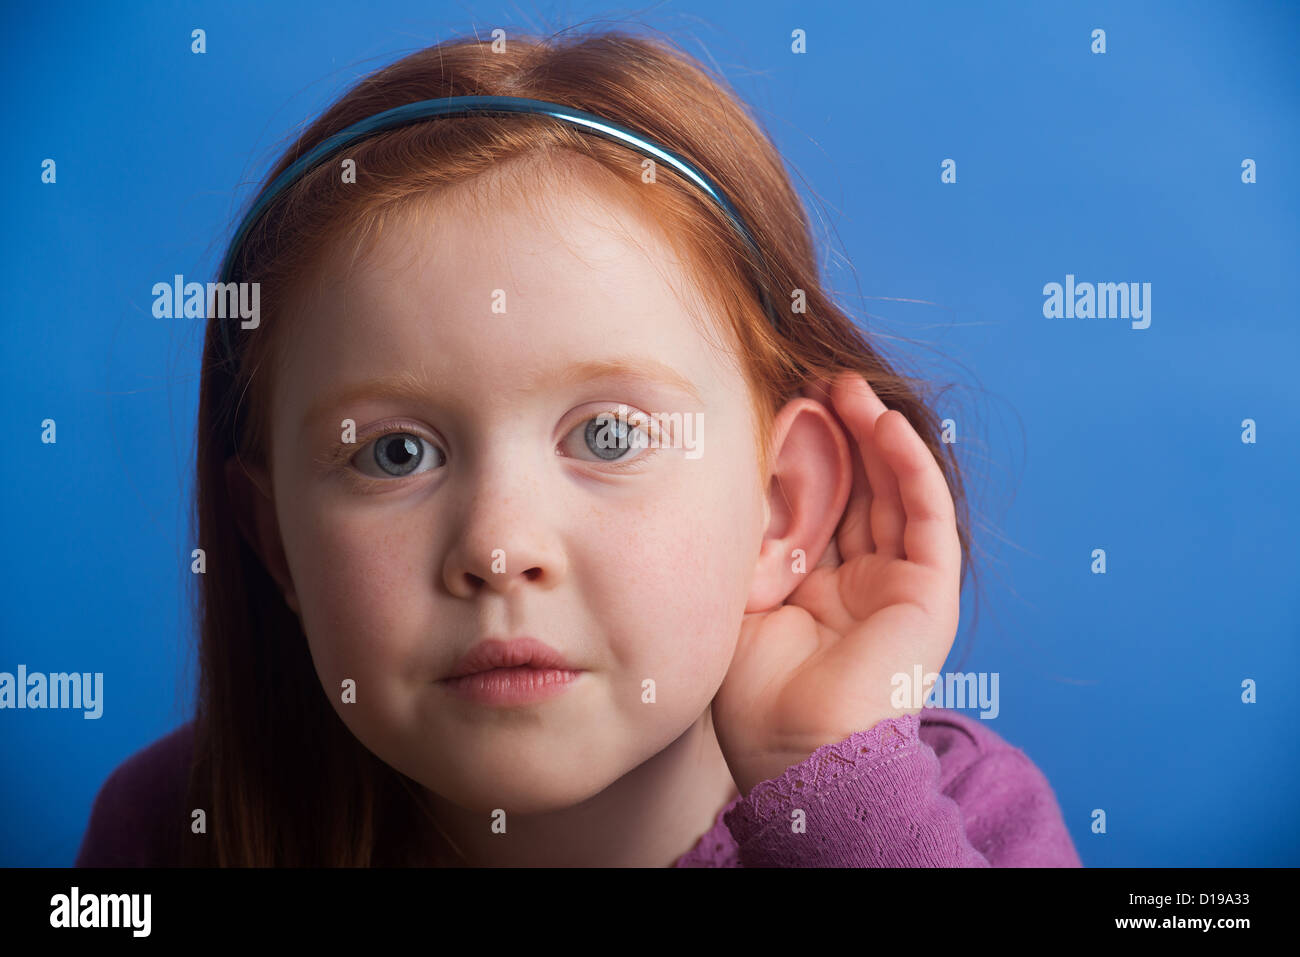 Girl aged 6 on a blue background cupping ear to improve hearing. Showing use of the sense to hear. Stock Photo